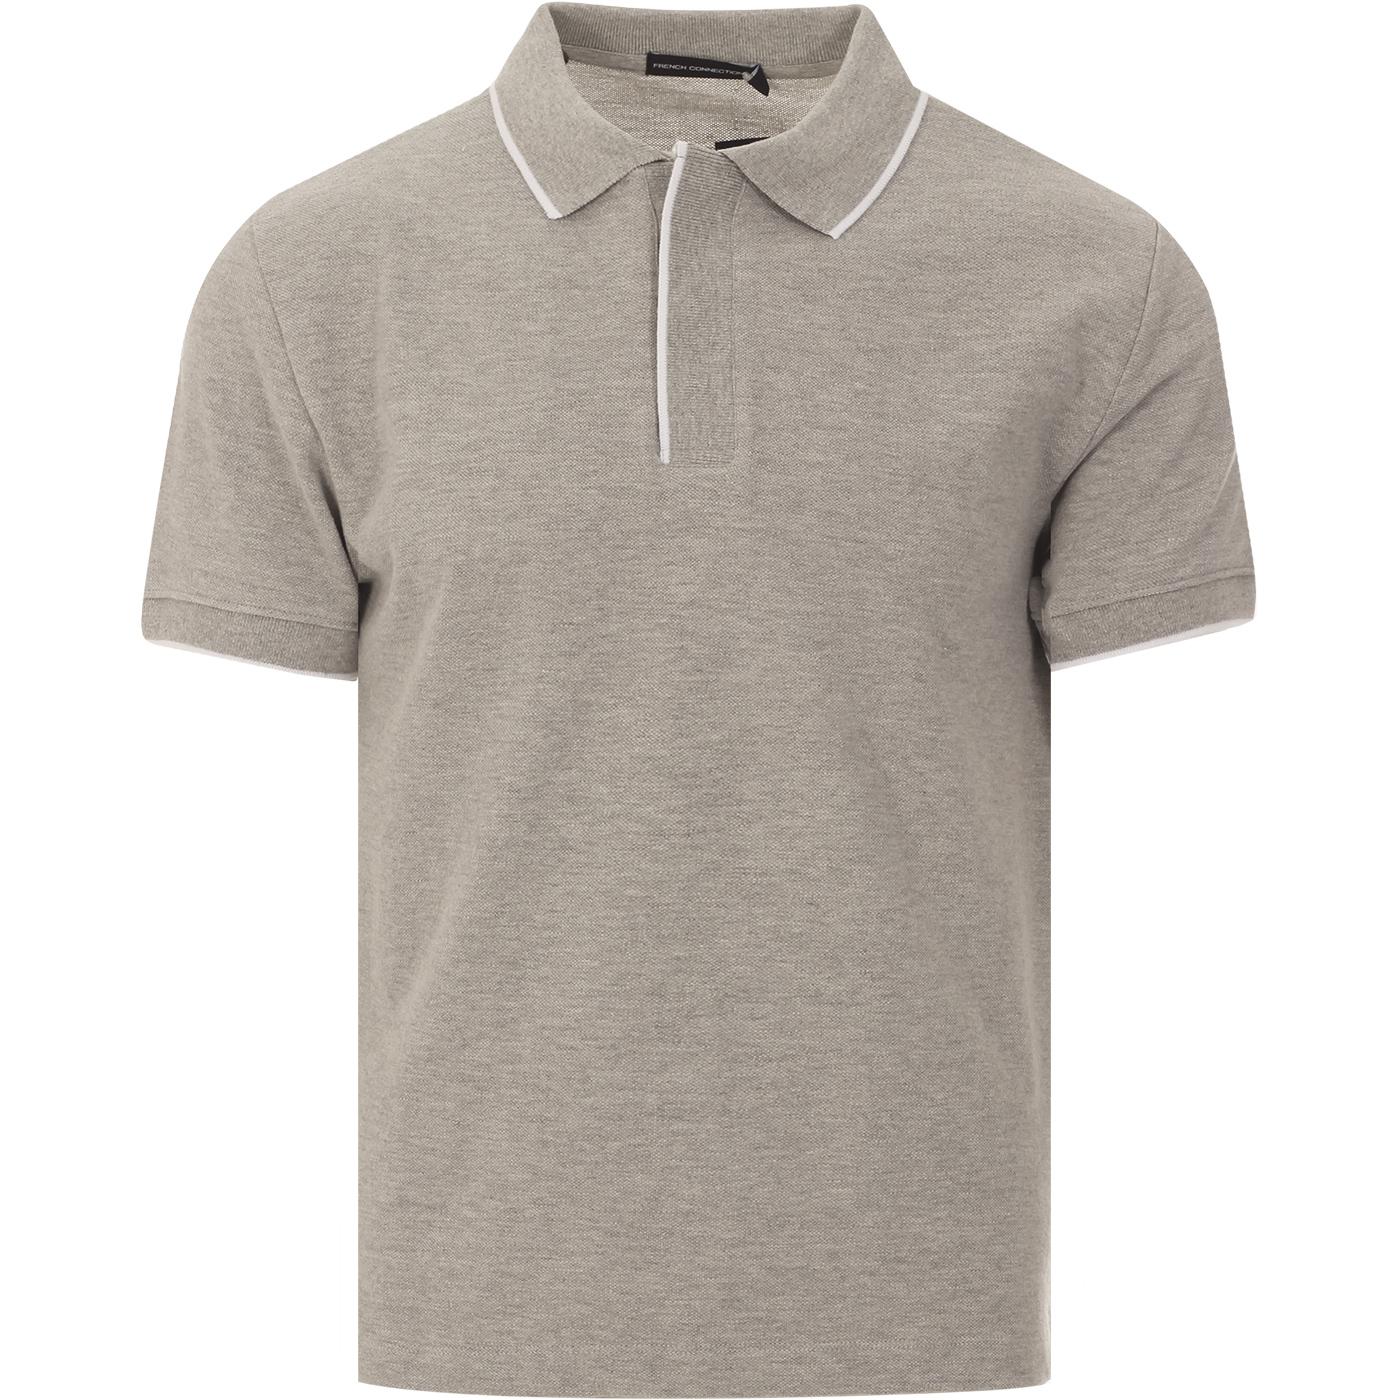 FRENCH CONNECTION Mod Concealed Placket Pique Polo